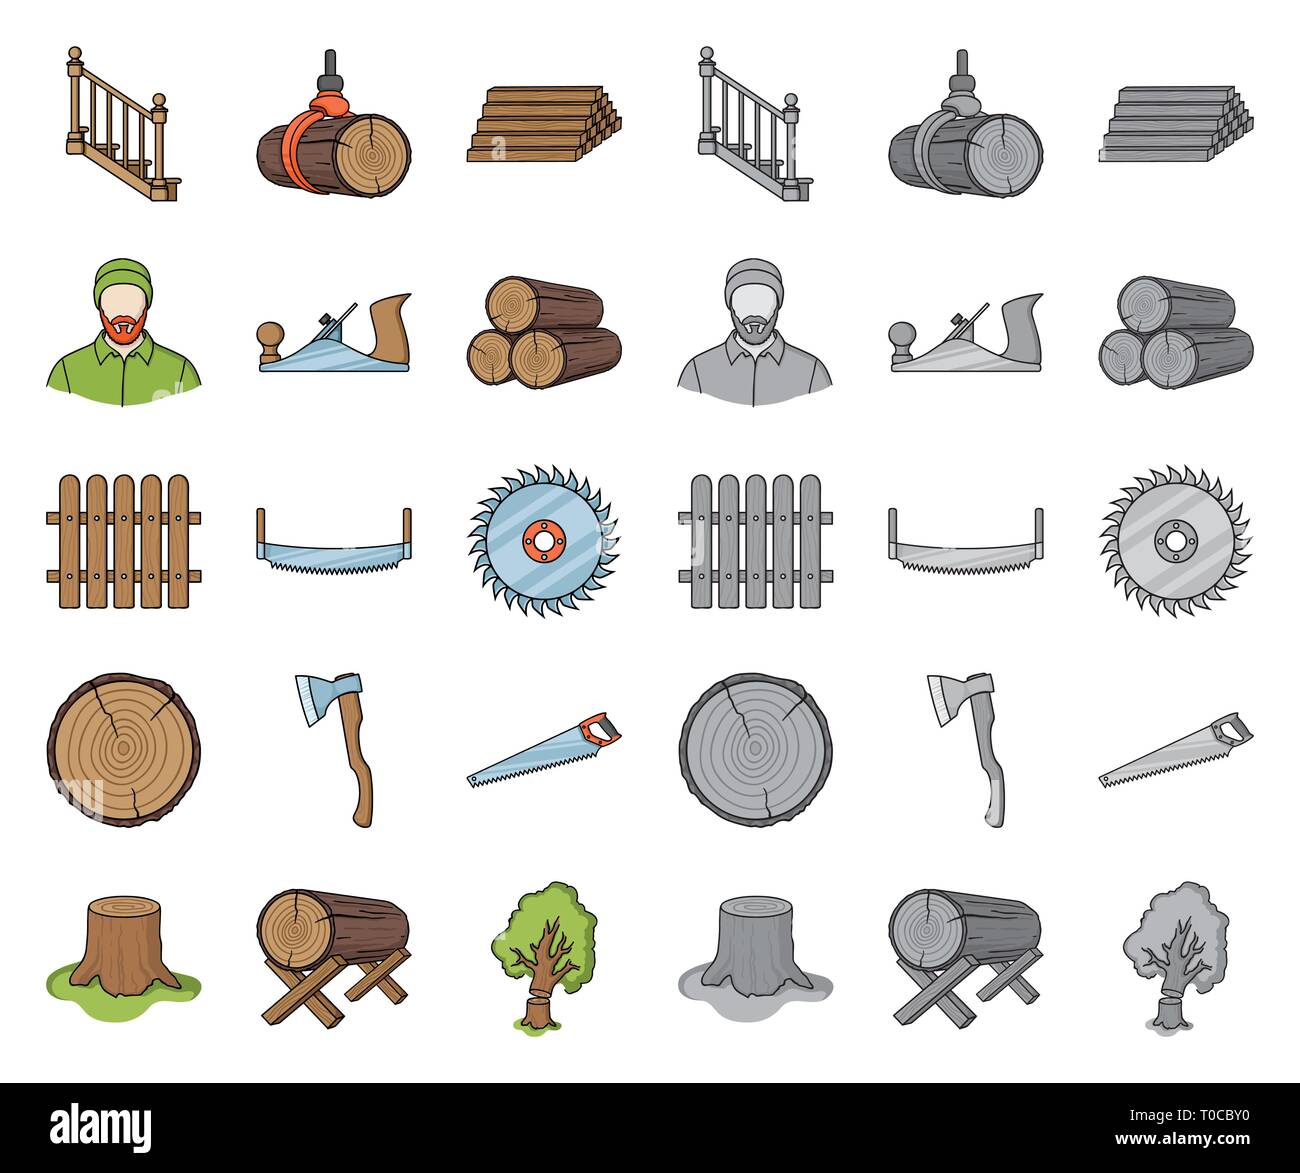 art,axe,cartoon,mono,chisel,collection,crane,cross,design,disc,equipment,falling,fence,goats,hand,hydraulic,icon,illustration,isolated,jack,logo,logs,lumber,lumbers,lumbrejack,plane,processing,product,production,saw,sawing,sawmill,section,set,sign,stack,stairs,stump,symbol,timber,tools,tree,two-man,vector,web Vector Vectors , Stock Vector